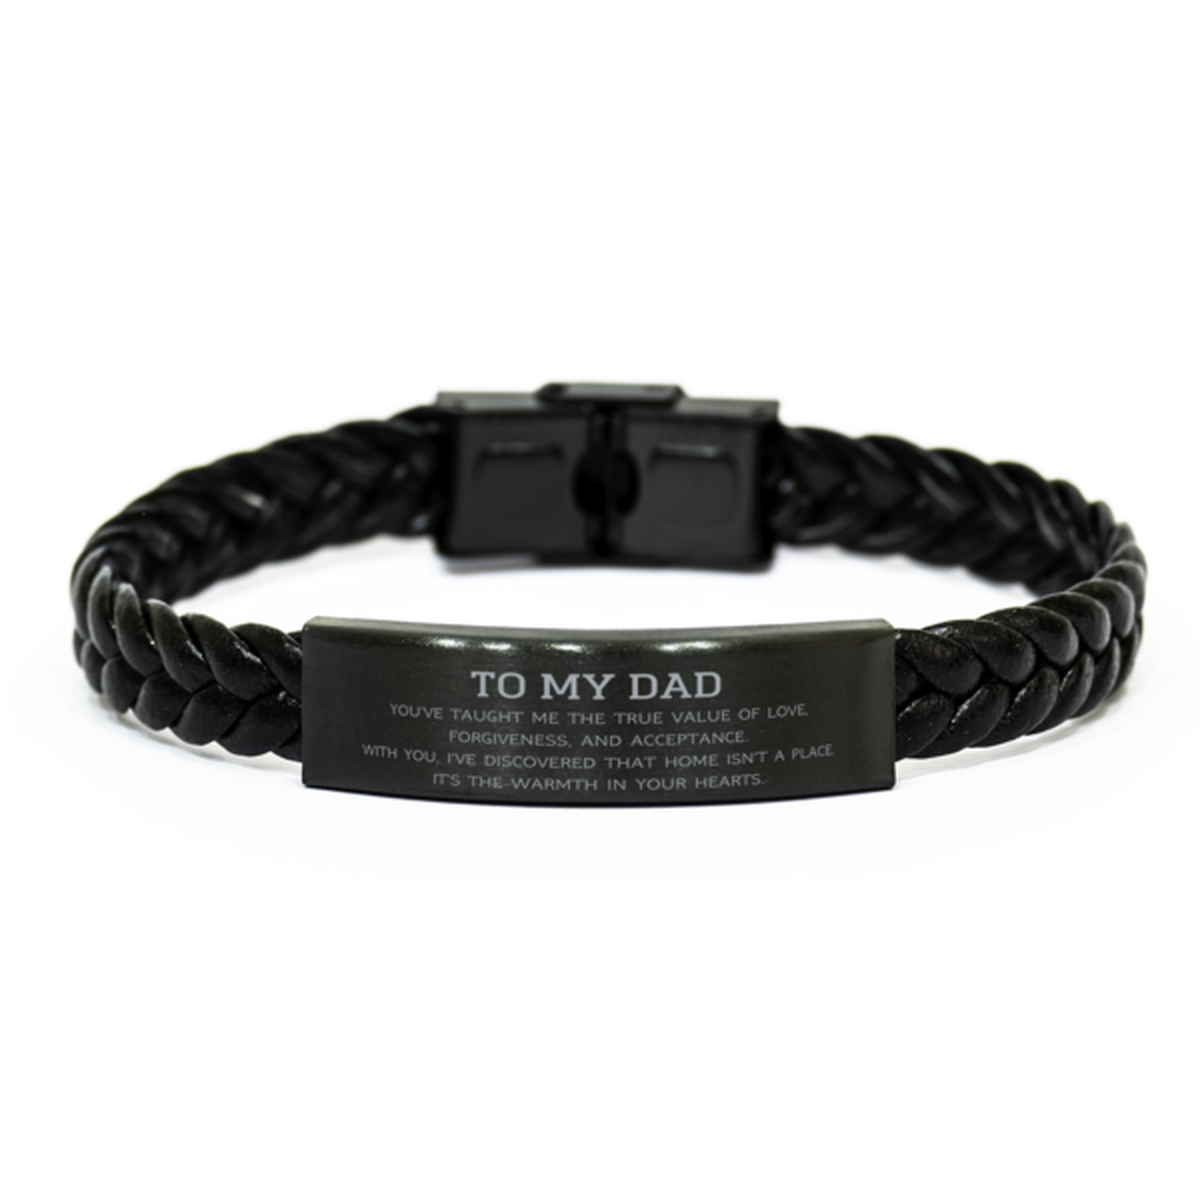 To My Dad Gifts, You've taught me the true value of love, Thank You Gifts For Dad, Birthday Braided Leather Bracelet For Dad